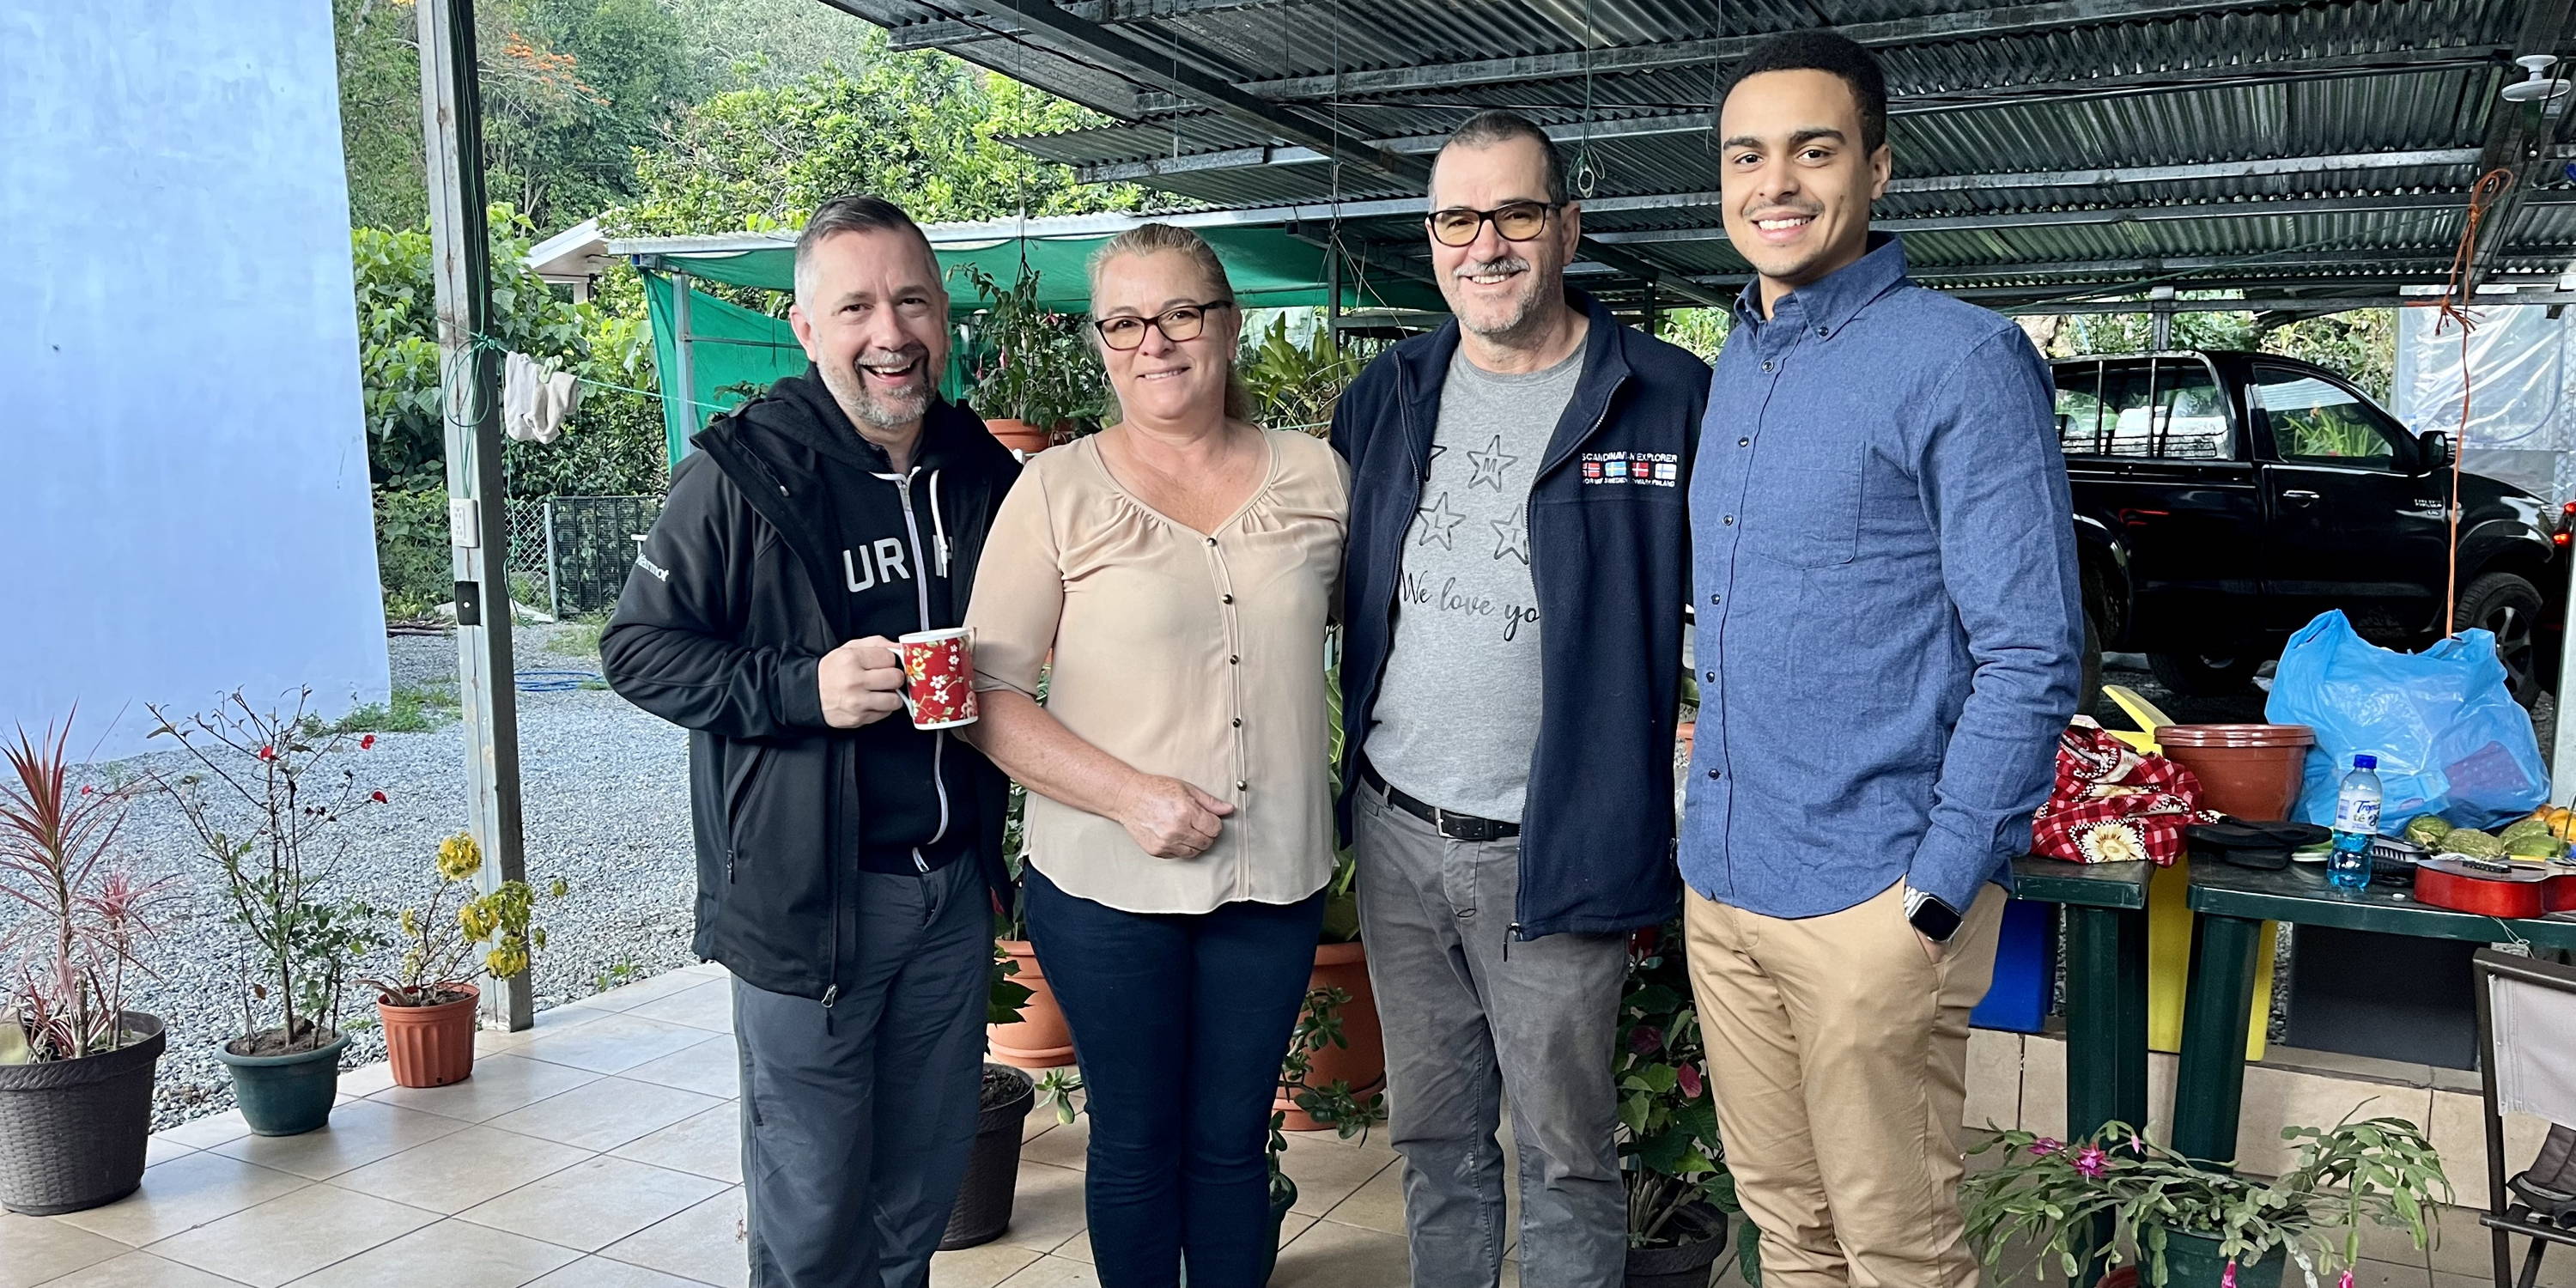 Justin Carabello and David Walker visit with Régulo and Isabella Ureńa on their Costa Rica coffee farm